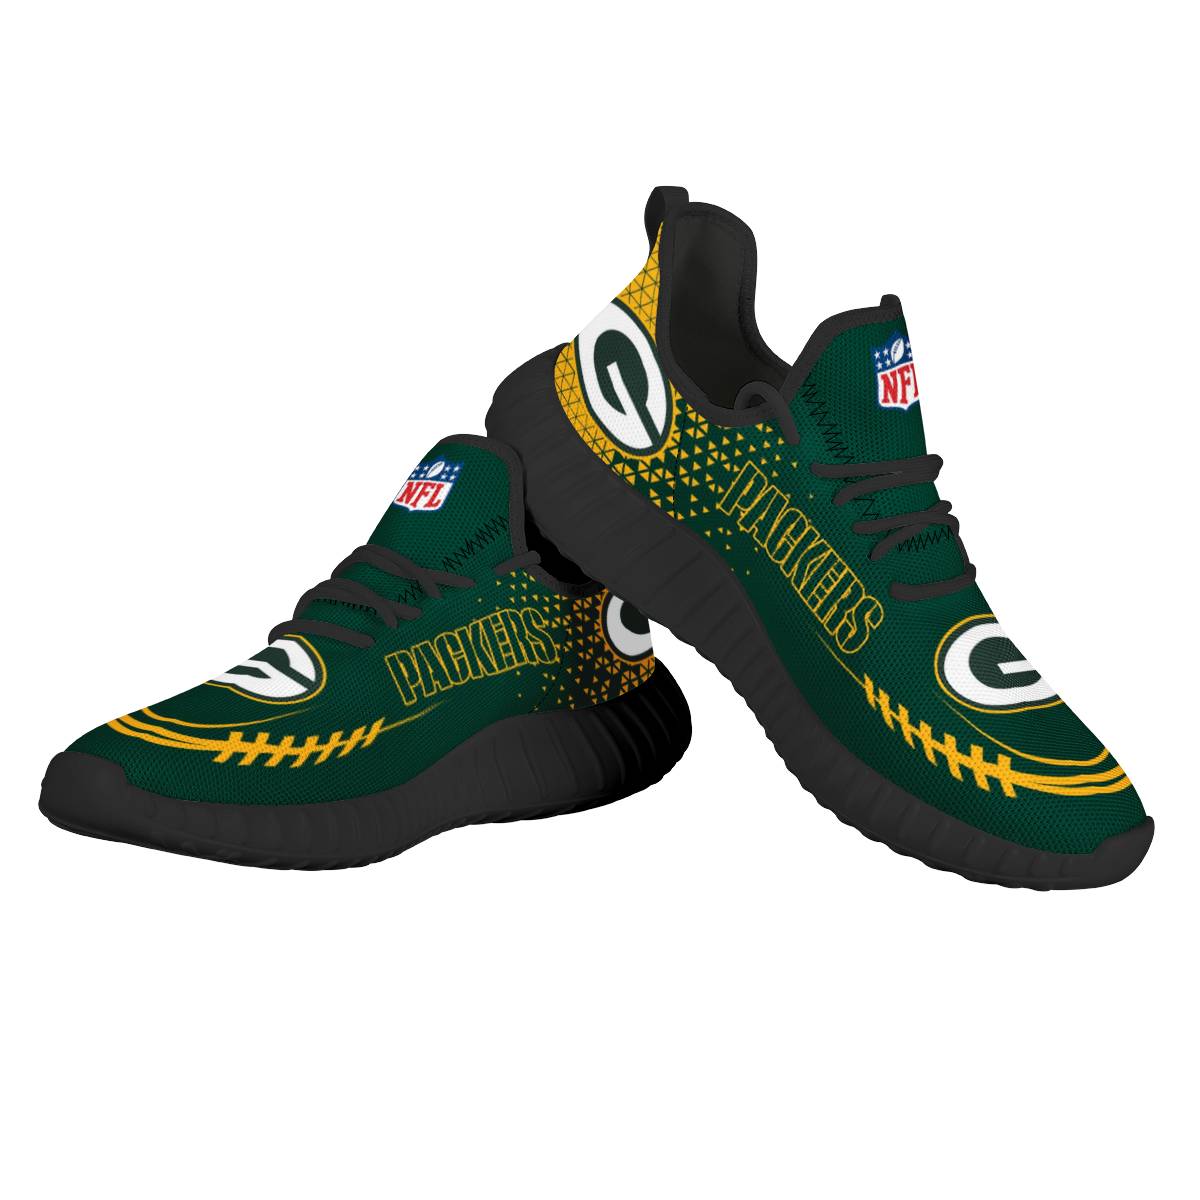 Women's NFL Green Bay Packers Mesh Knit Sneakers/Shoes 002